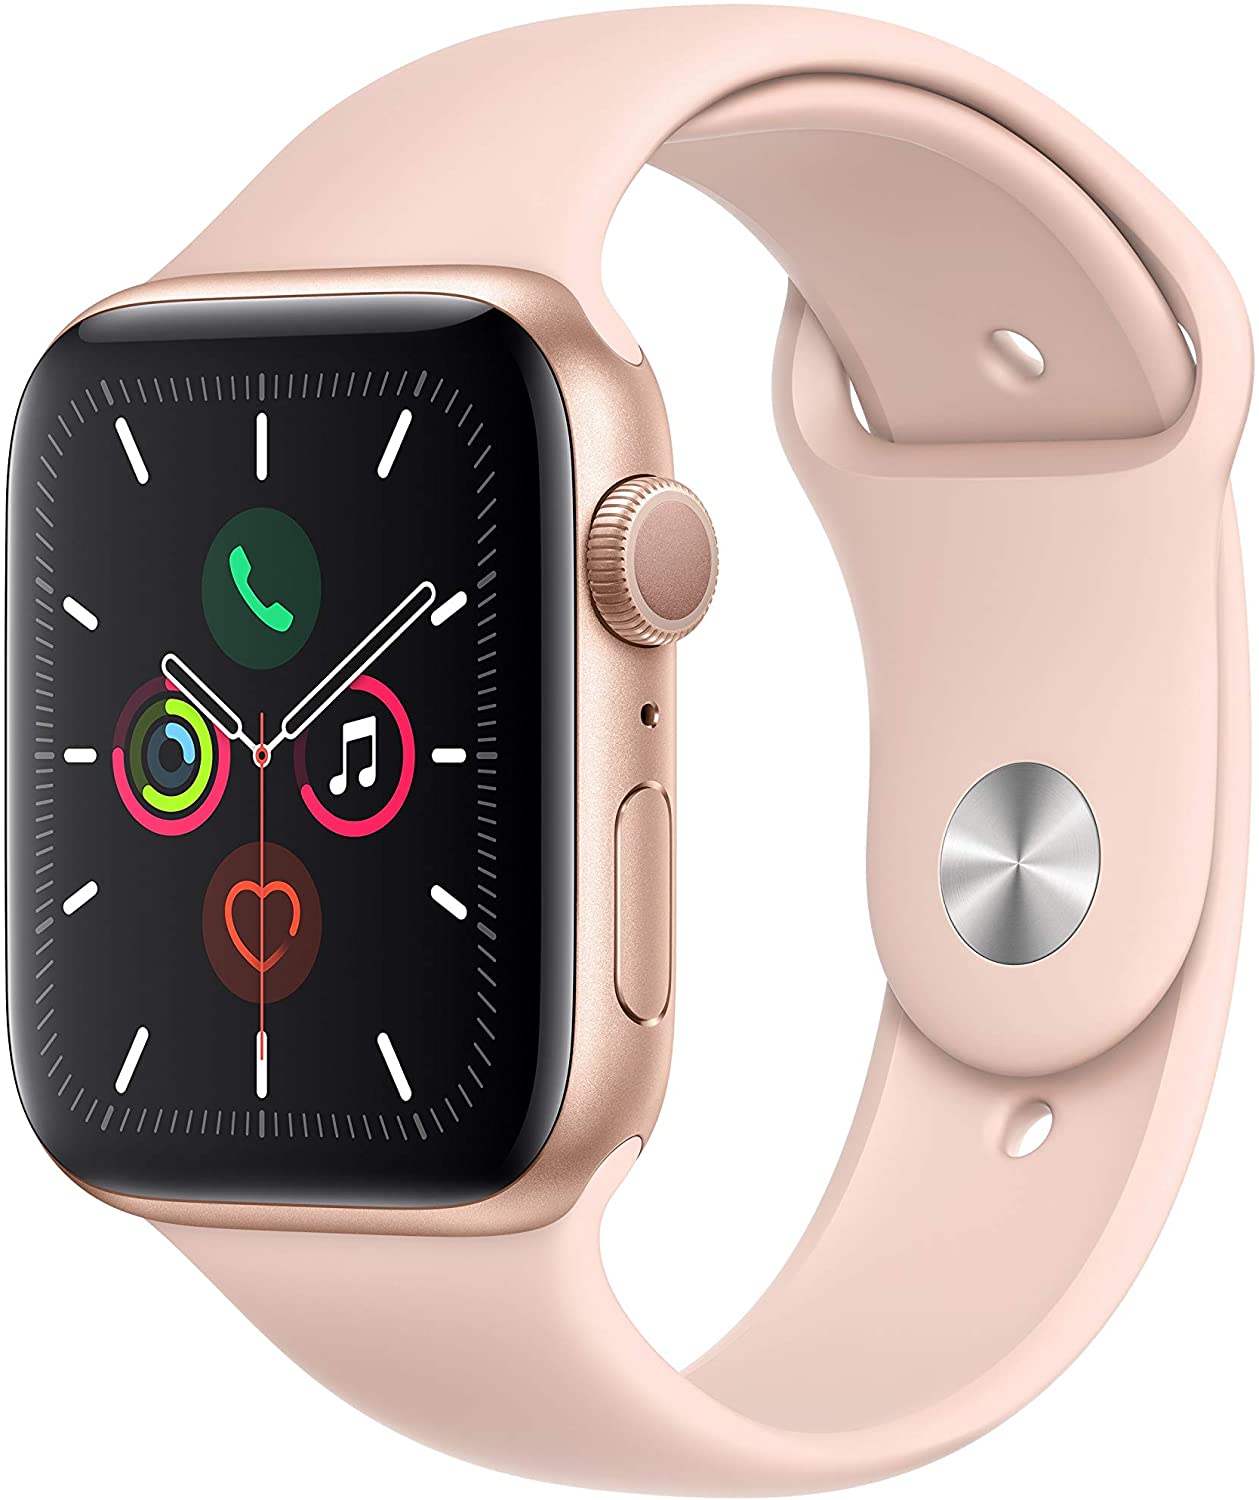 Apple Watch Series 5: Recommended